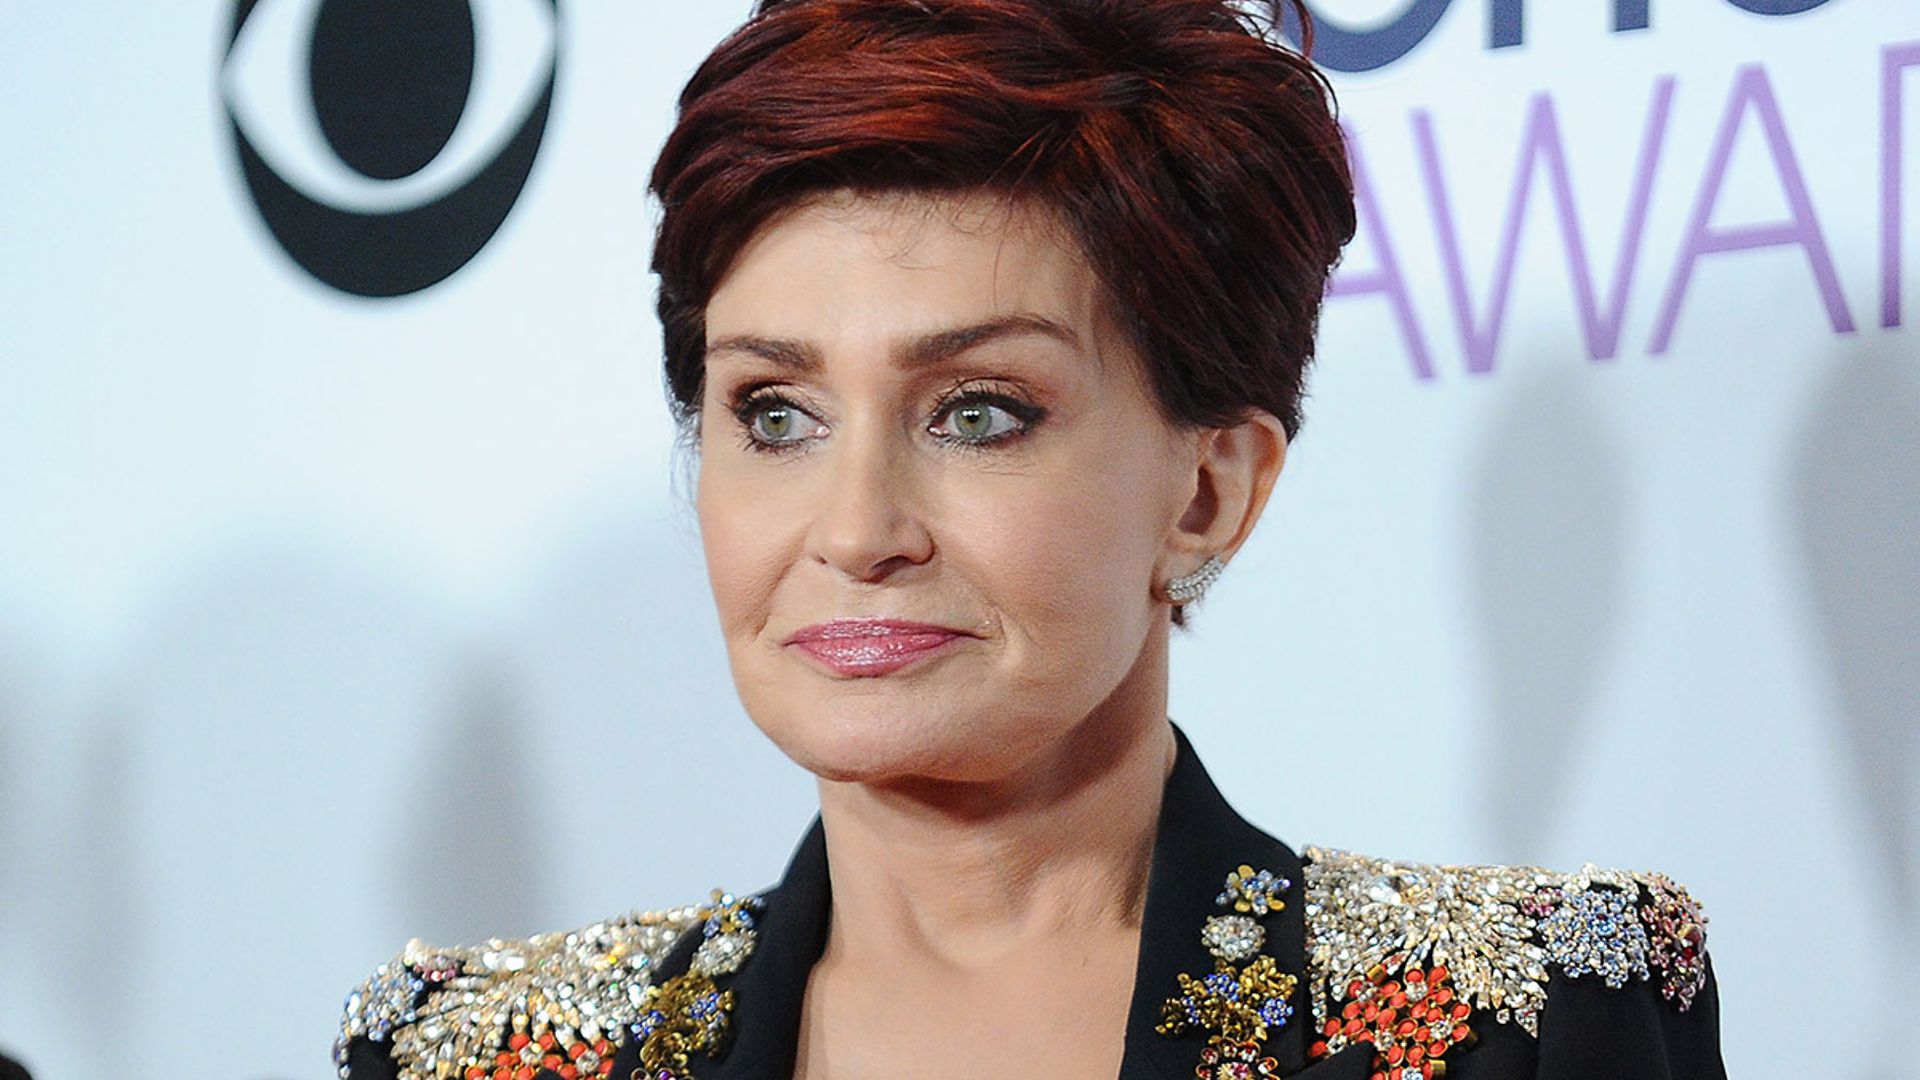 Sharon Osbourne calls for fans help with cause close to her heart